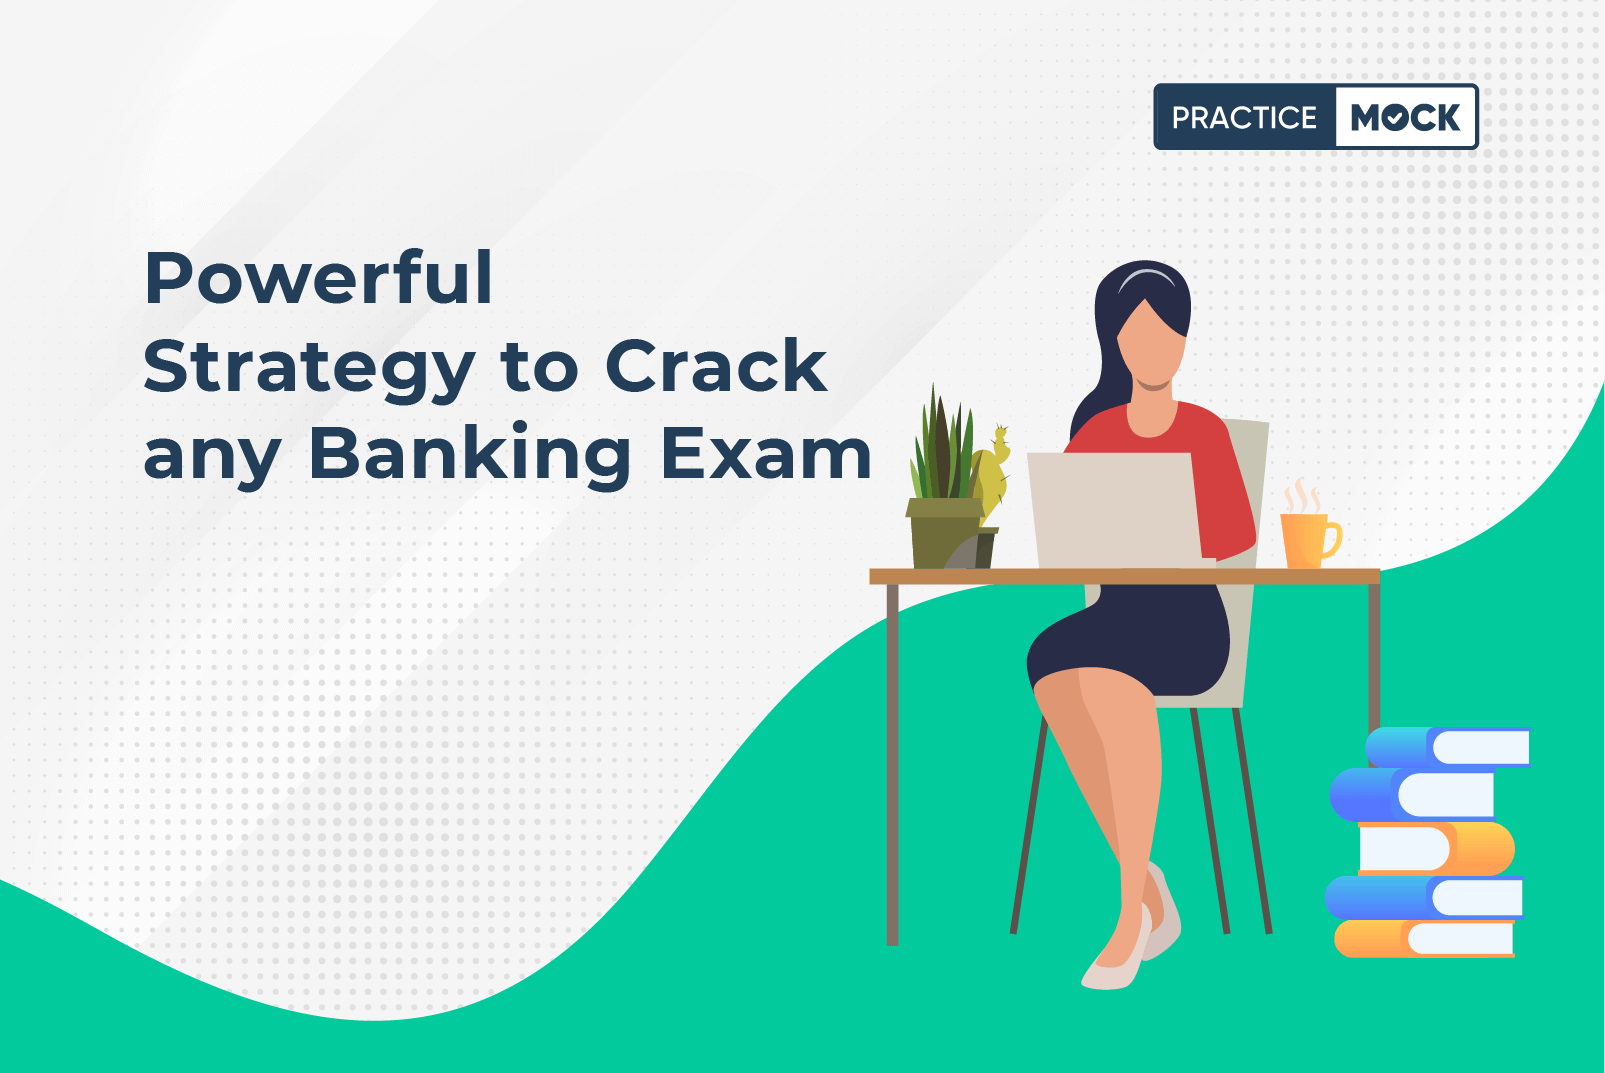 Powerful Strategy to Crack any Banking Exam